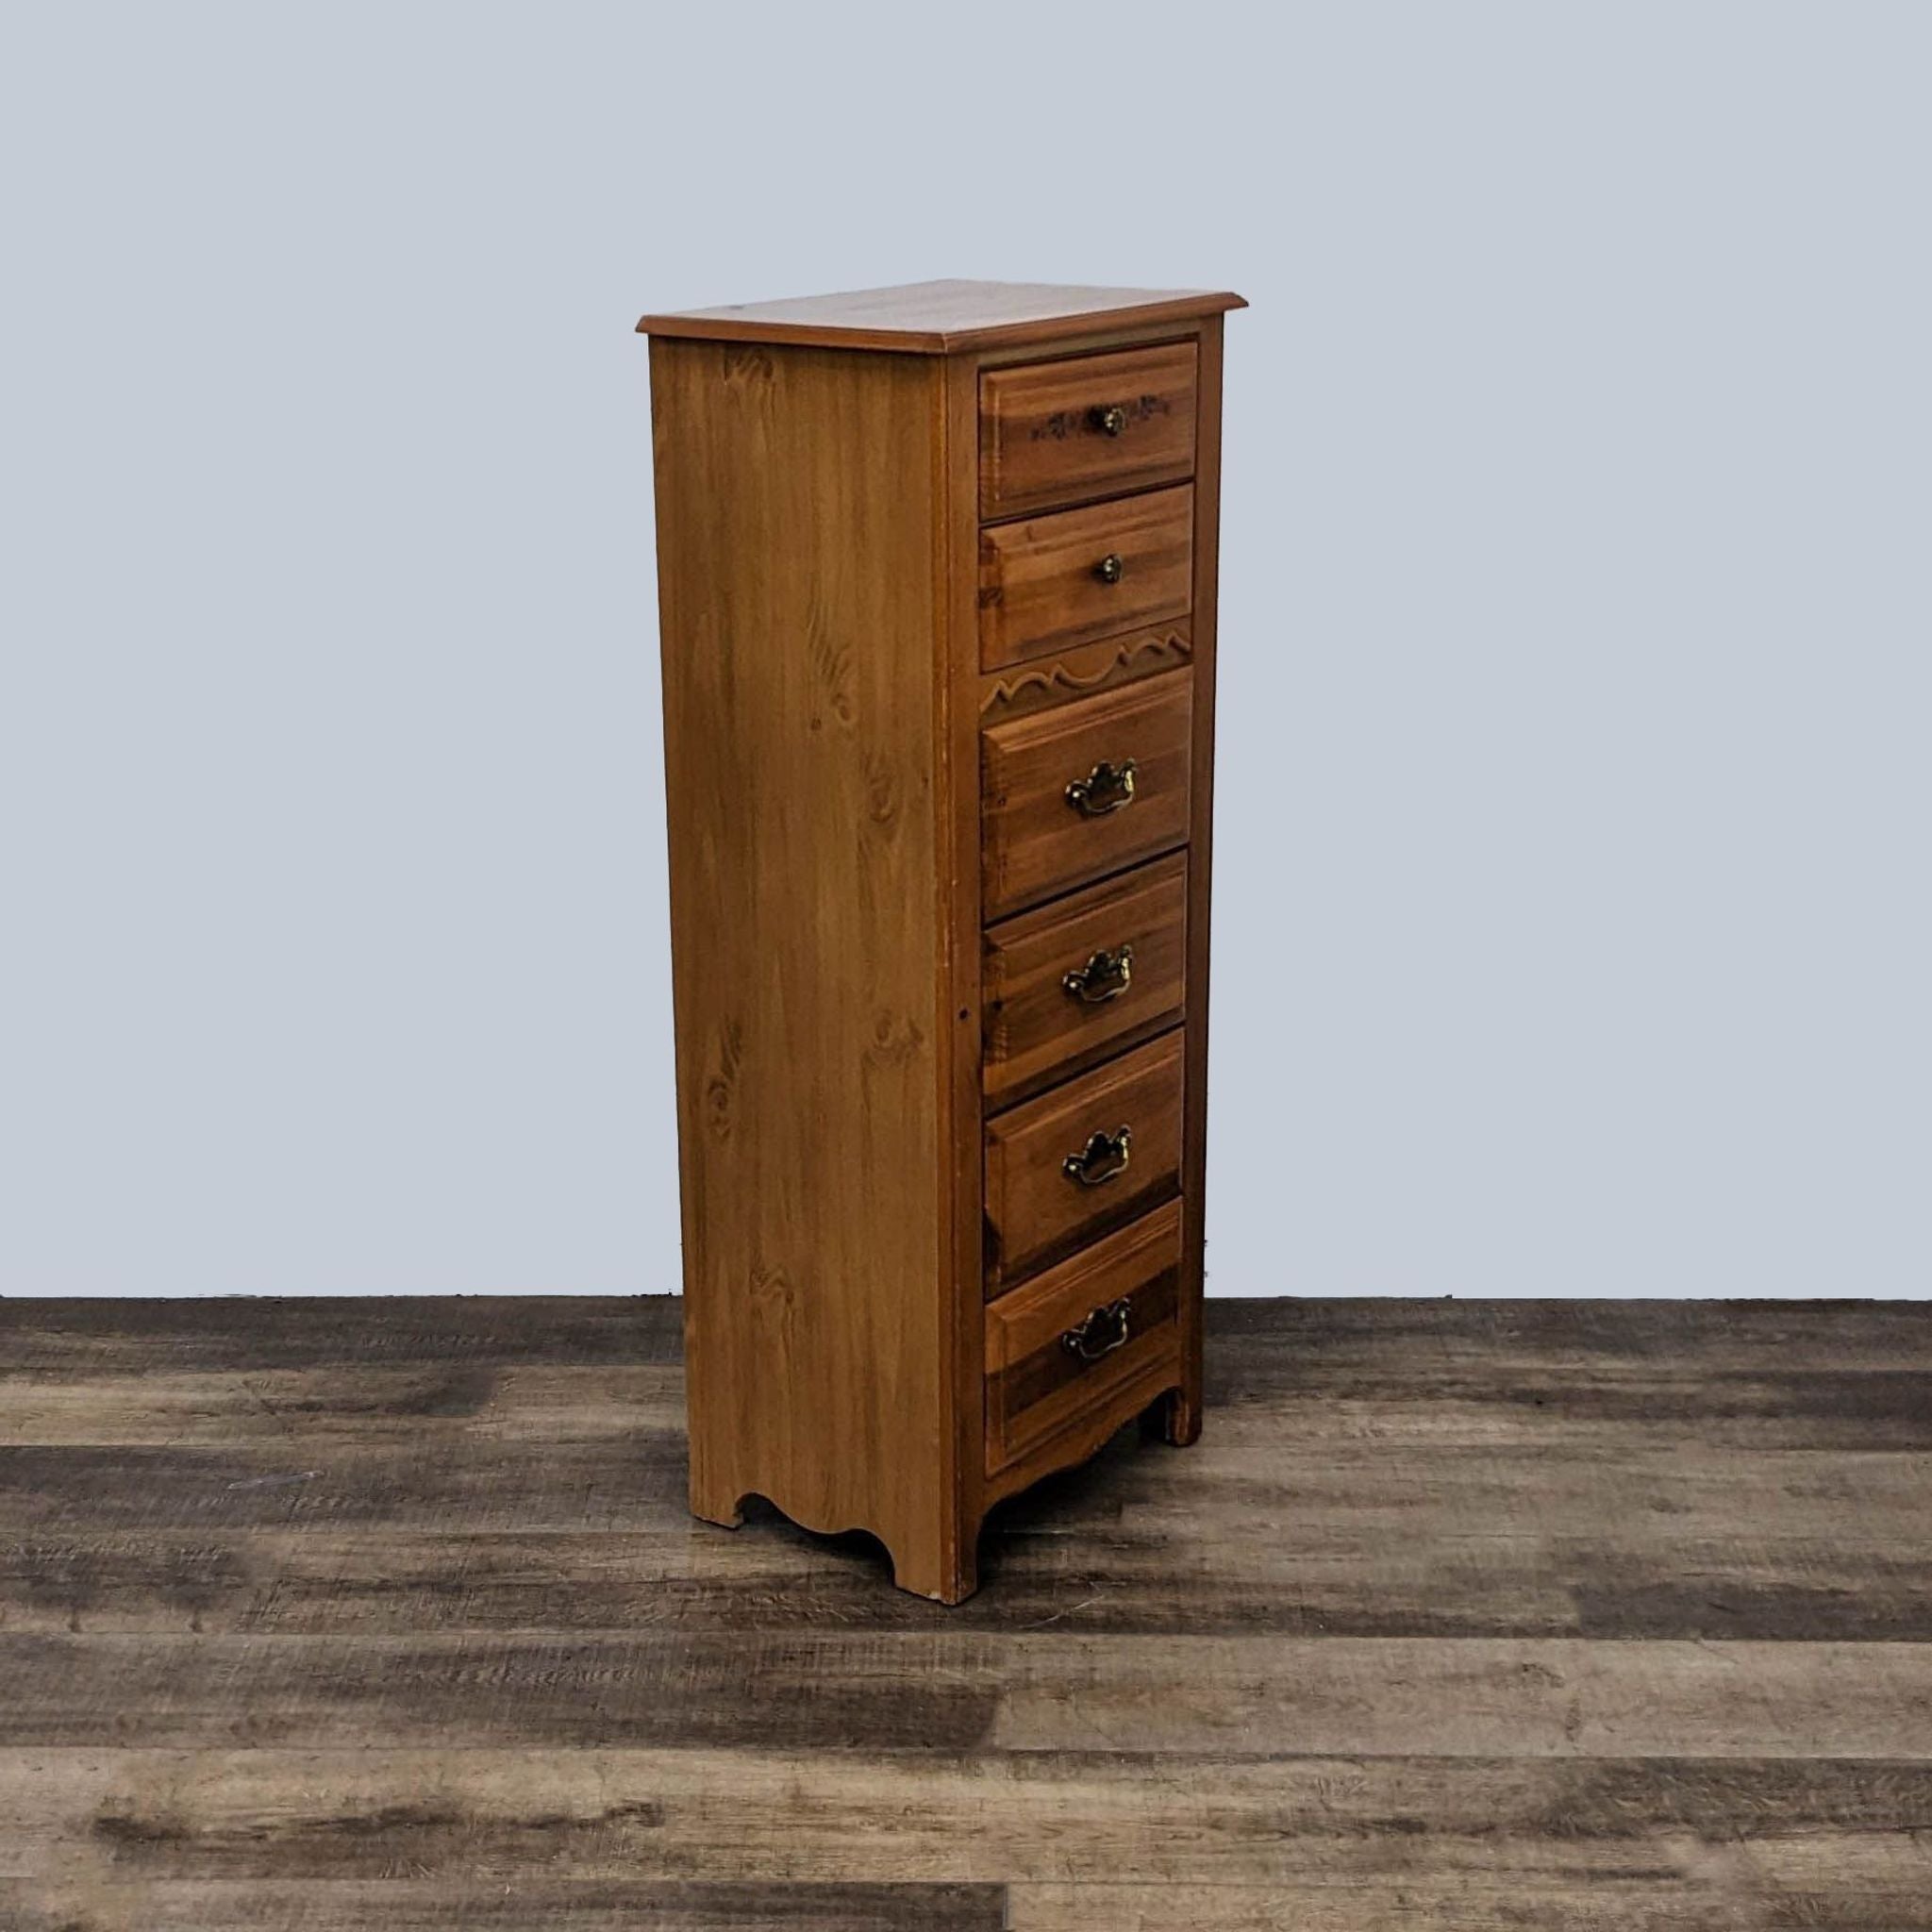 Side view of a Broyhill tallboy dresser, showcasing its compact shape and wood craftsmanship, on textured flooring.